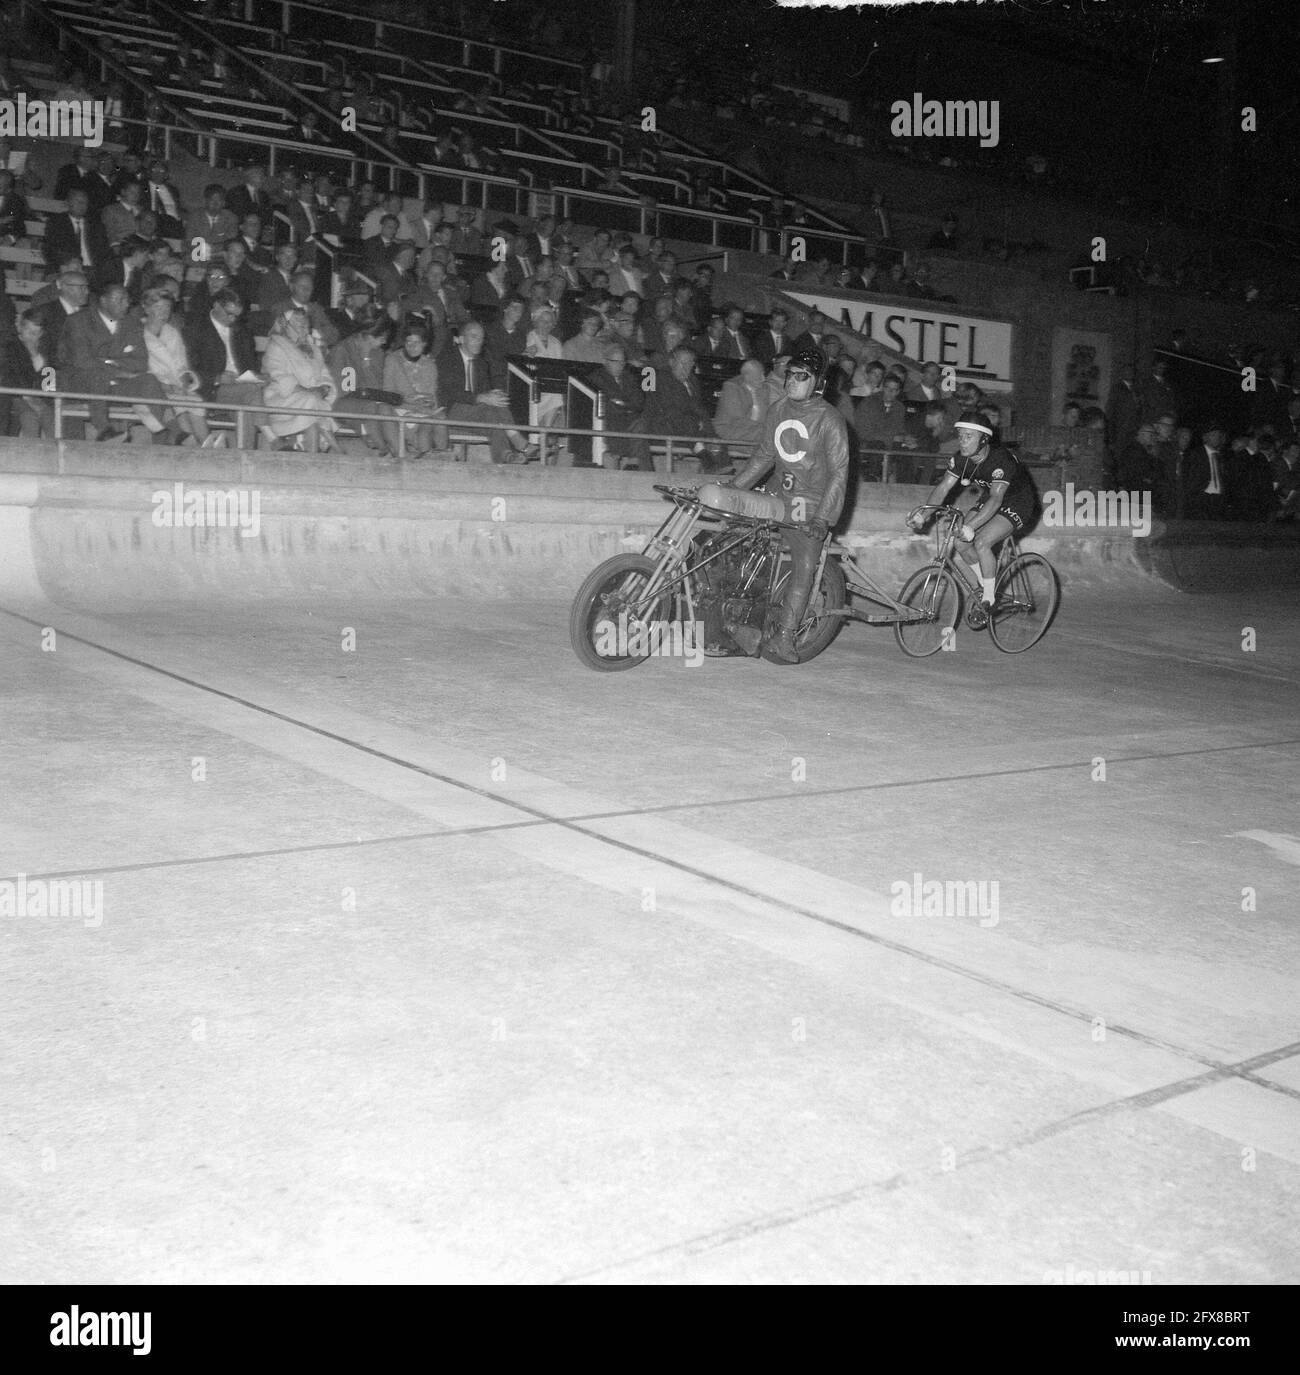 Championships on the track for pros in Olympic Stadium, H. Marinus in action, July 30, 1964, CHAMPIONSHIPS, actions, pros, cycling, The Netherlands, 20th century press agency photo, news to remember, documentary, historic photography 1945-1990, visual stories, human history of the Twentieth Century, capturing moments in time Stock Photo